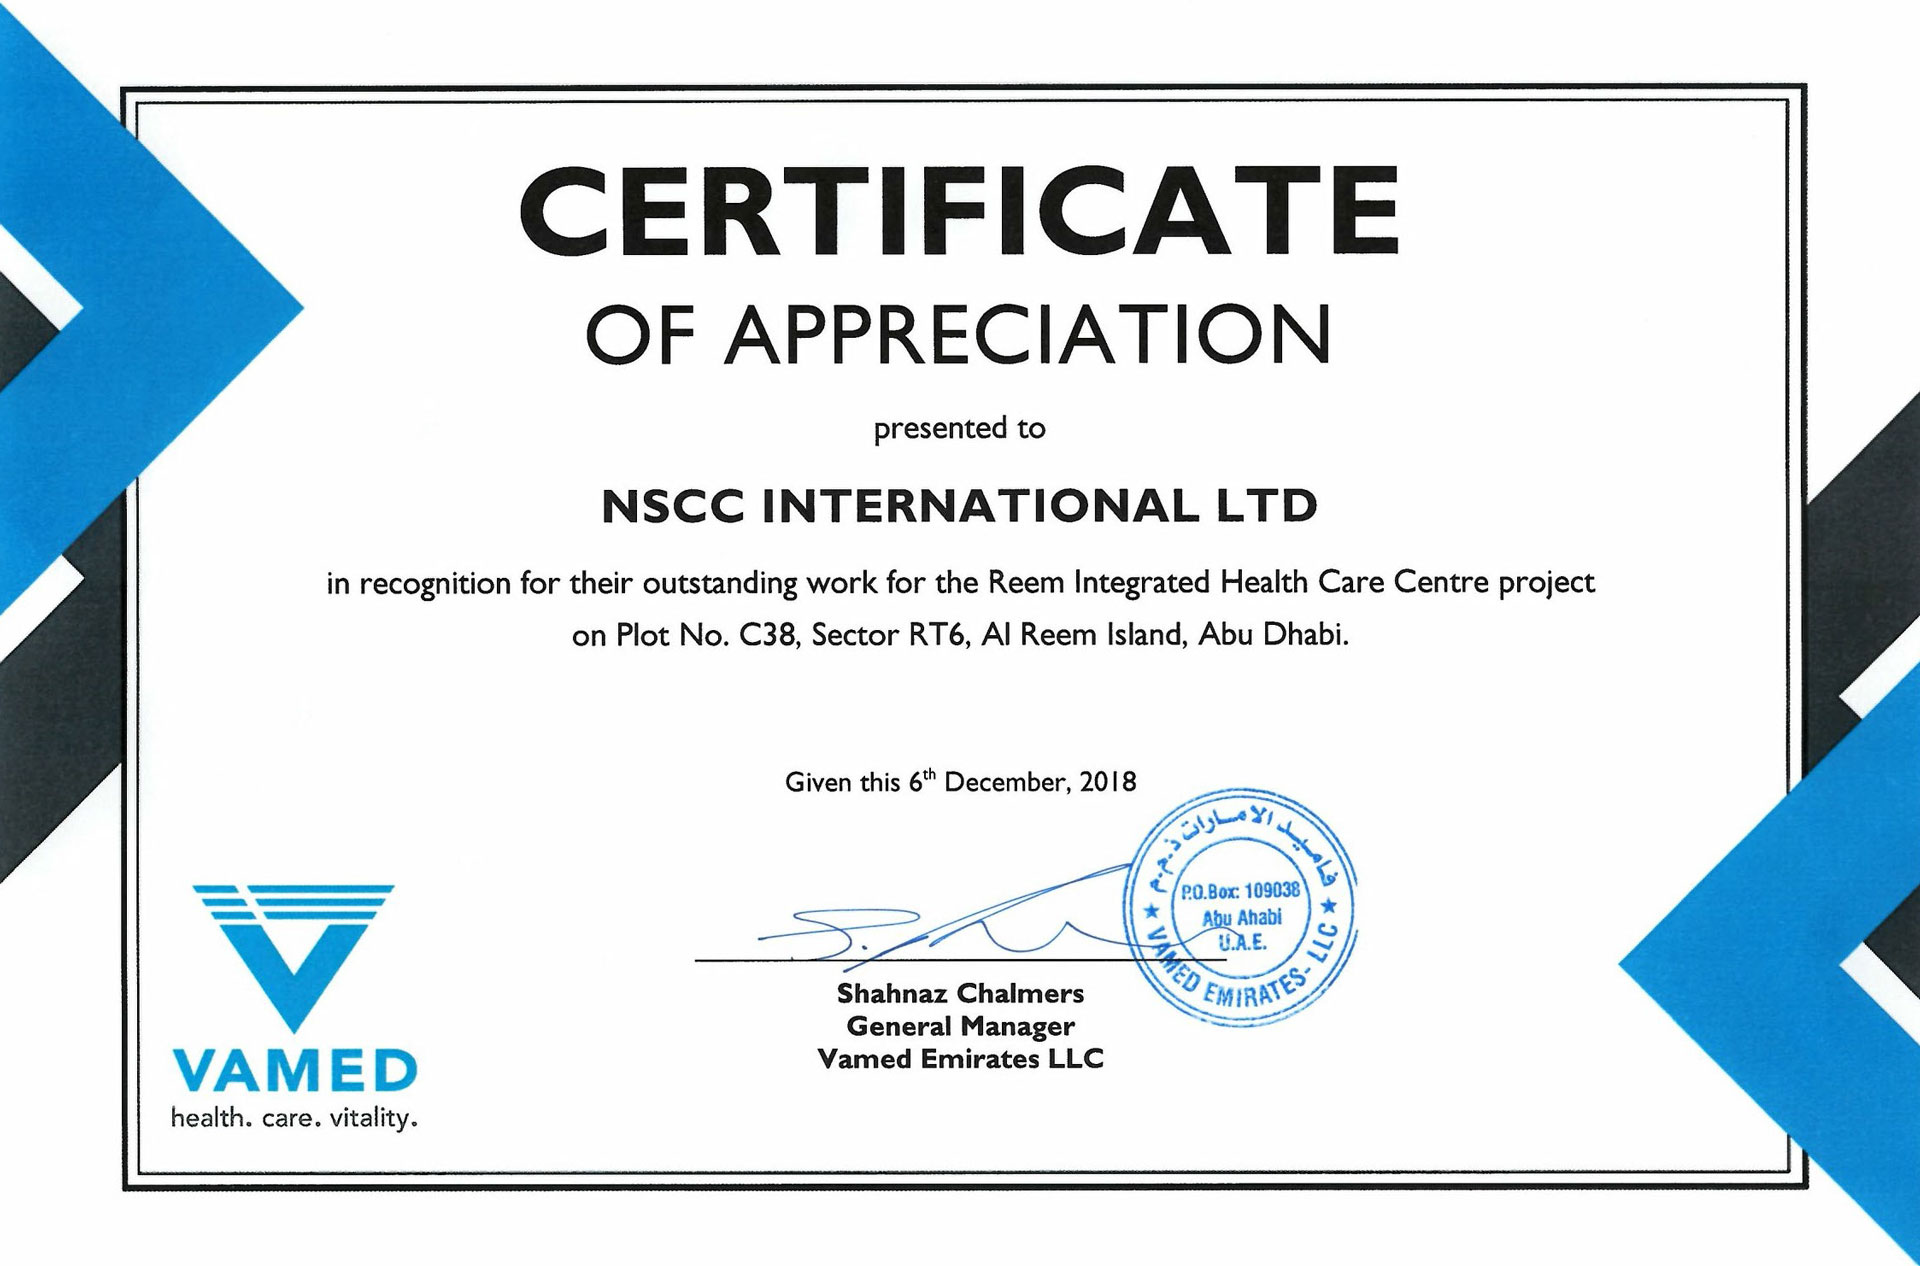 Certificate of Appreciation for Reem Integrated Health Care Centre